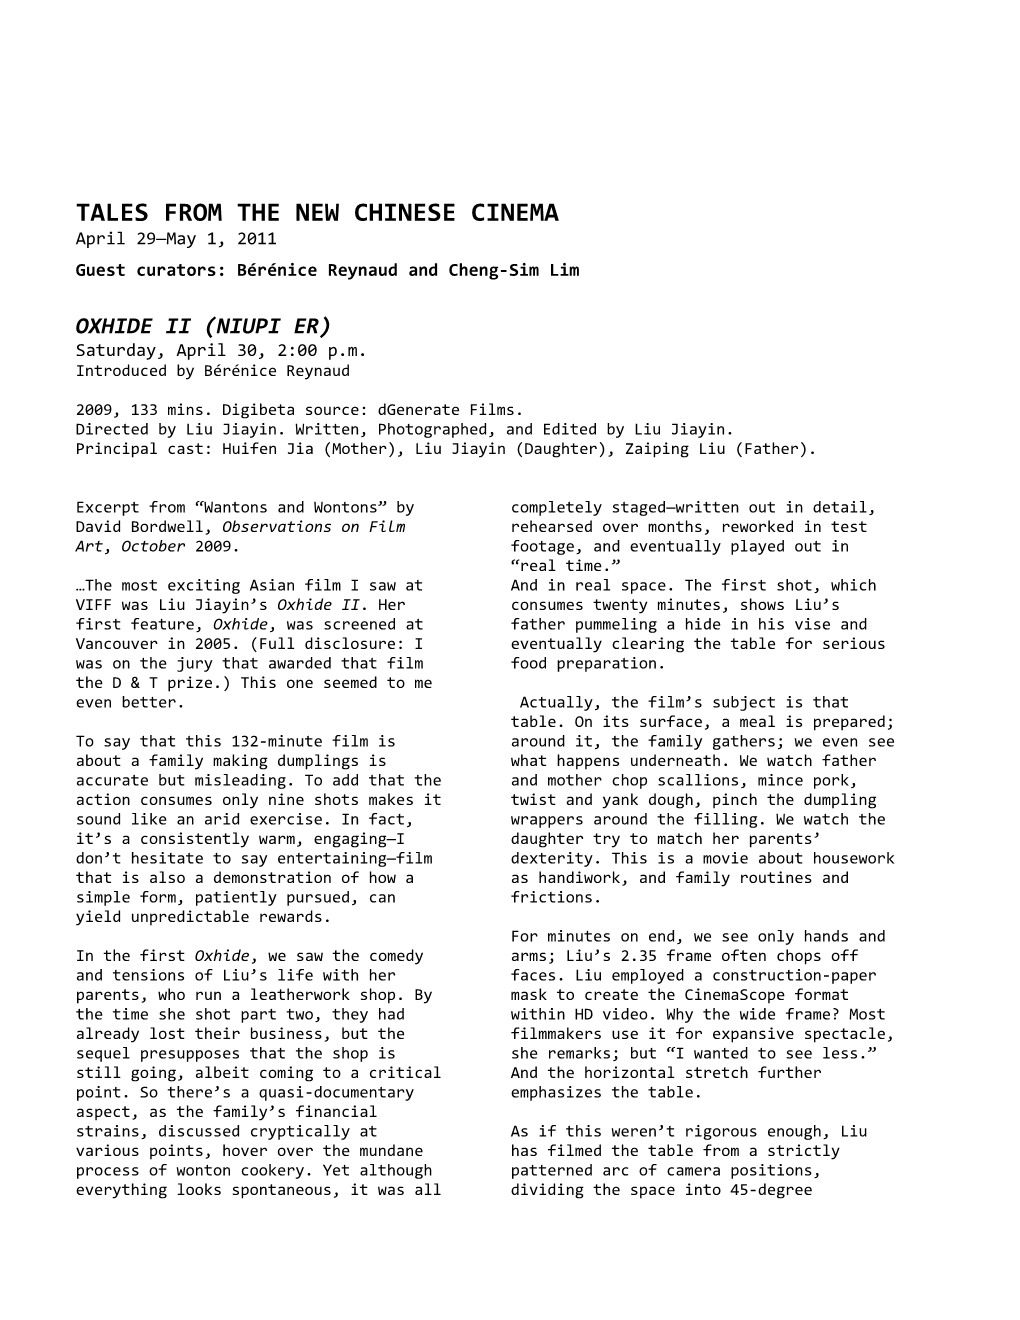 Tales from the New Chinese Cinema